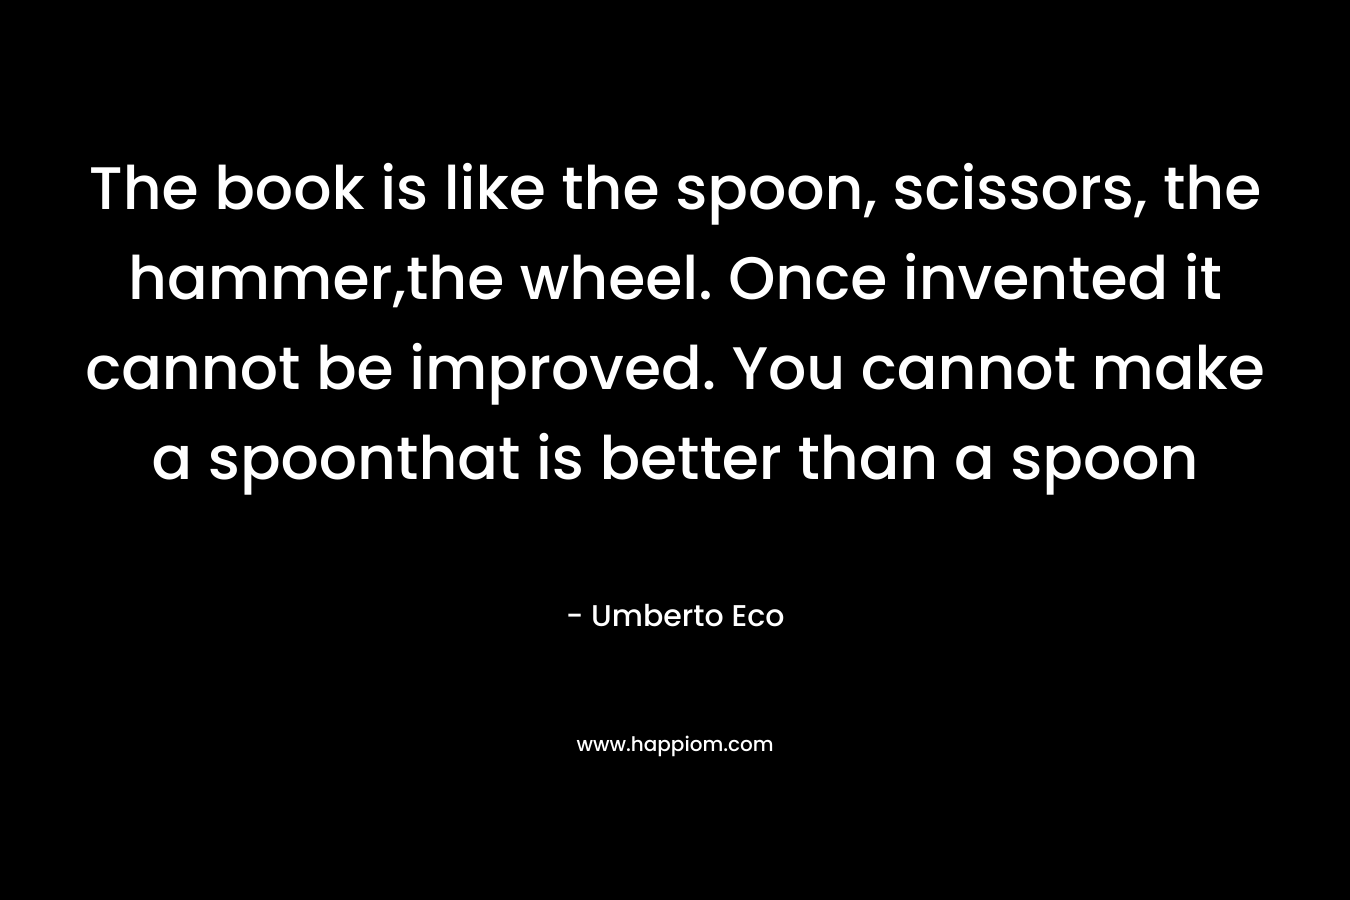 The book is like the spoon, scissors, the hammer,the wheel. Once invented it cannot be improved. You cannot make a spoonthat is better than a spoon – Umberto Eco